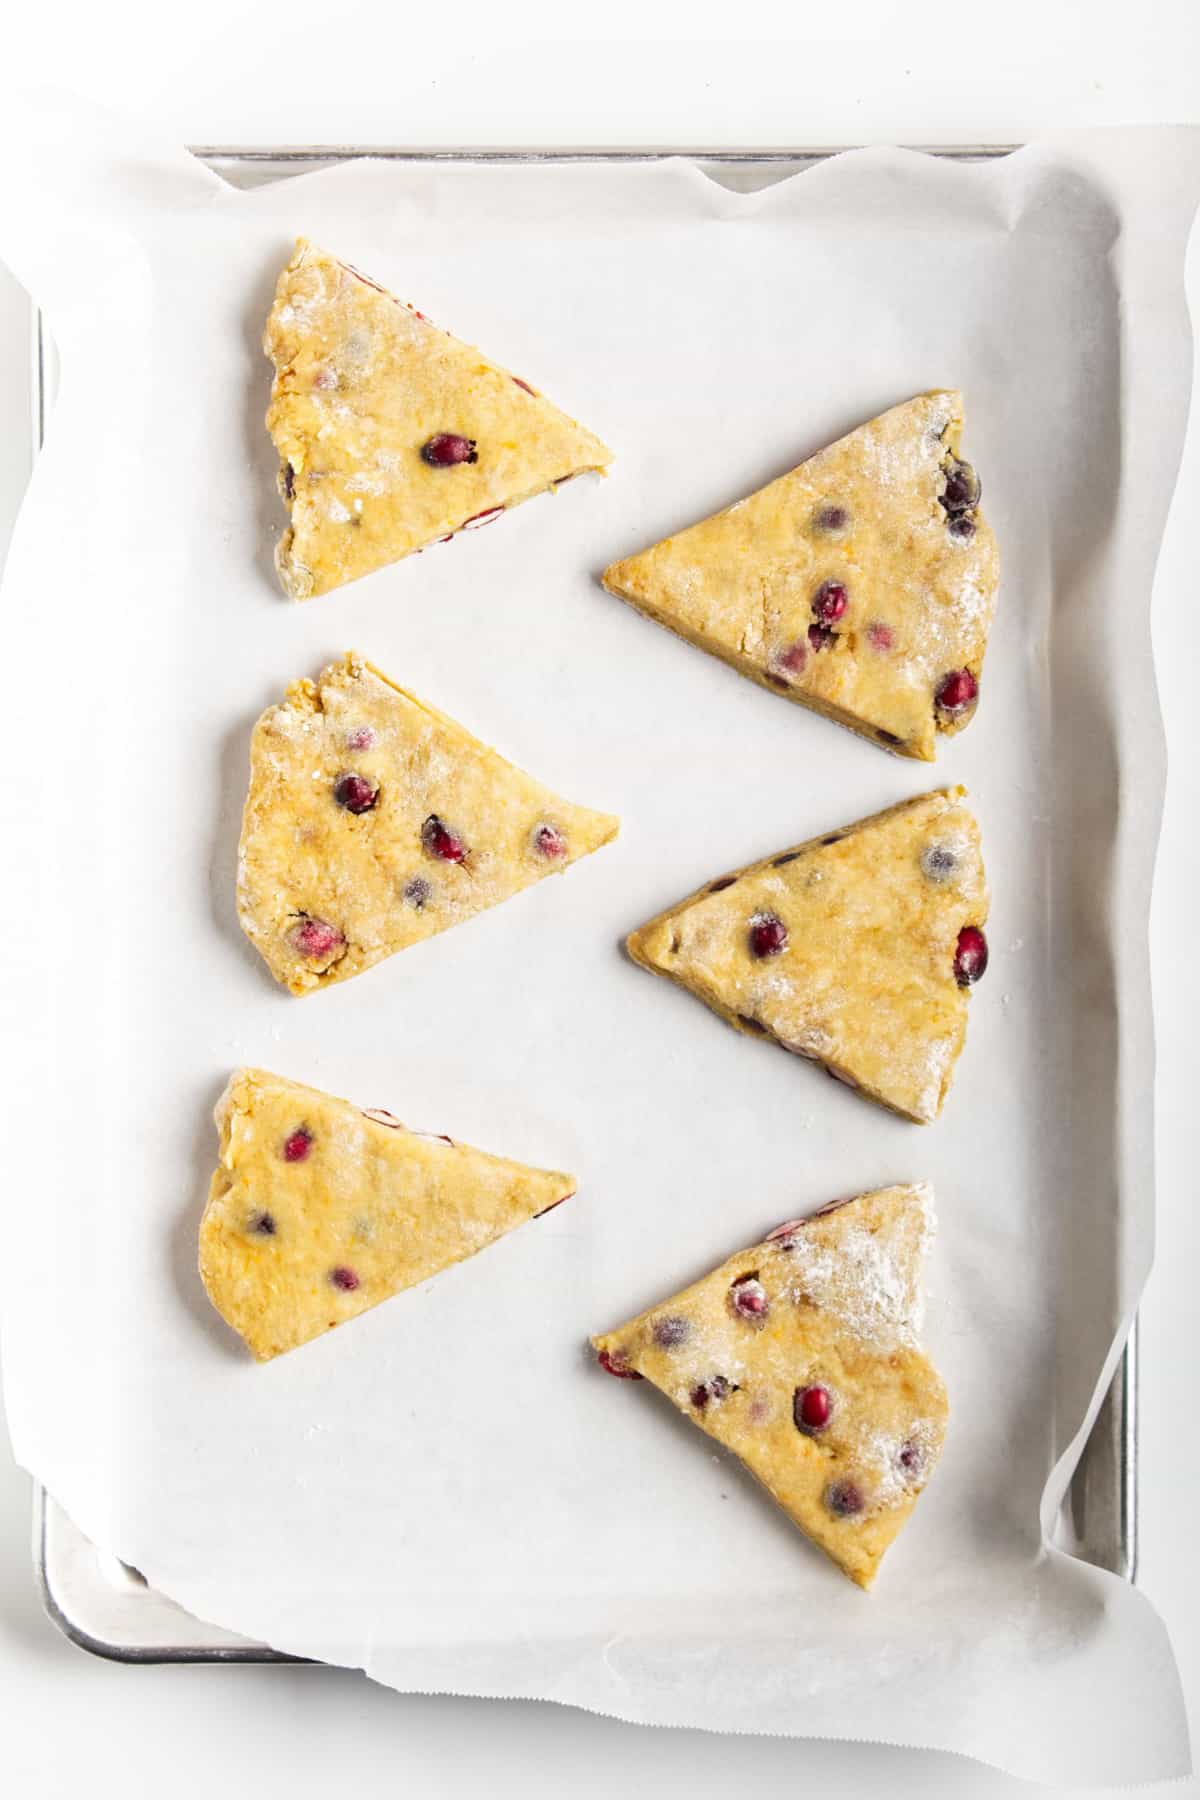 Unbaked cranberry orange scones with icing on a wire rack.